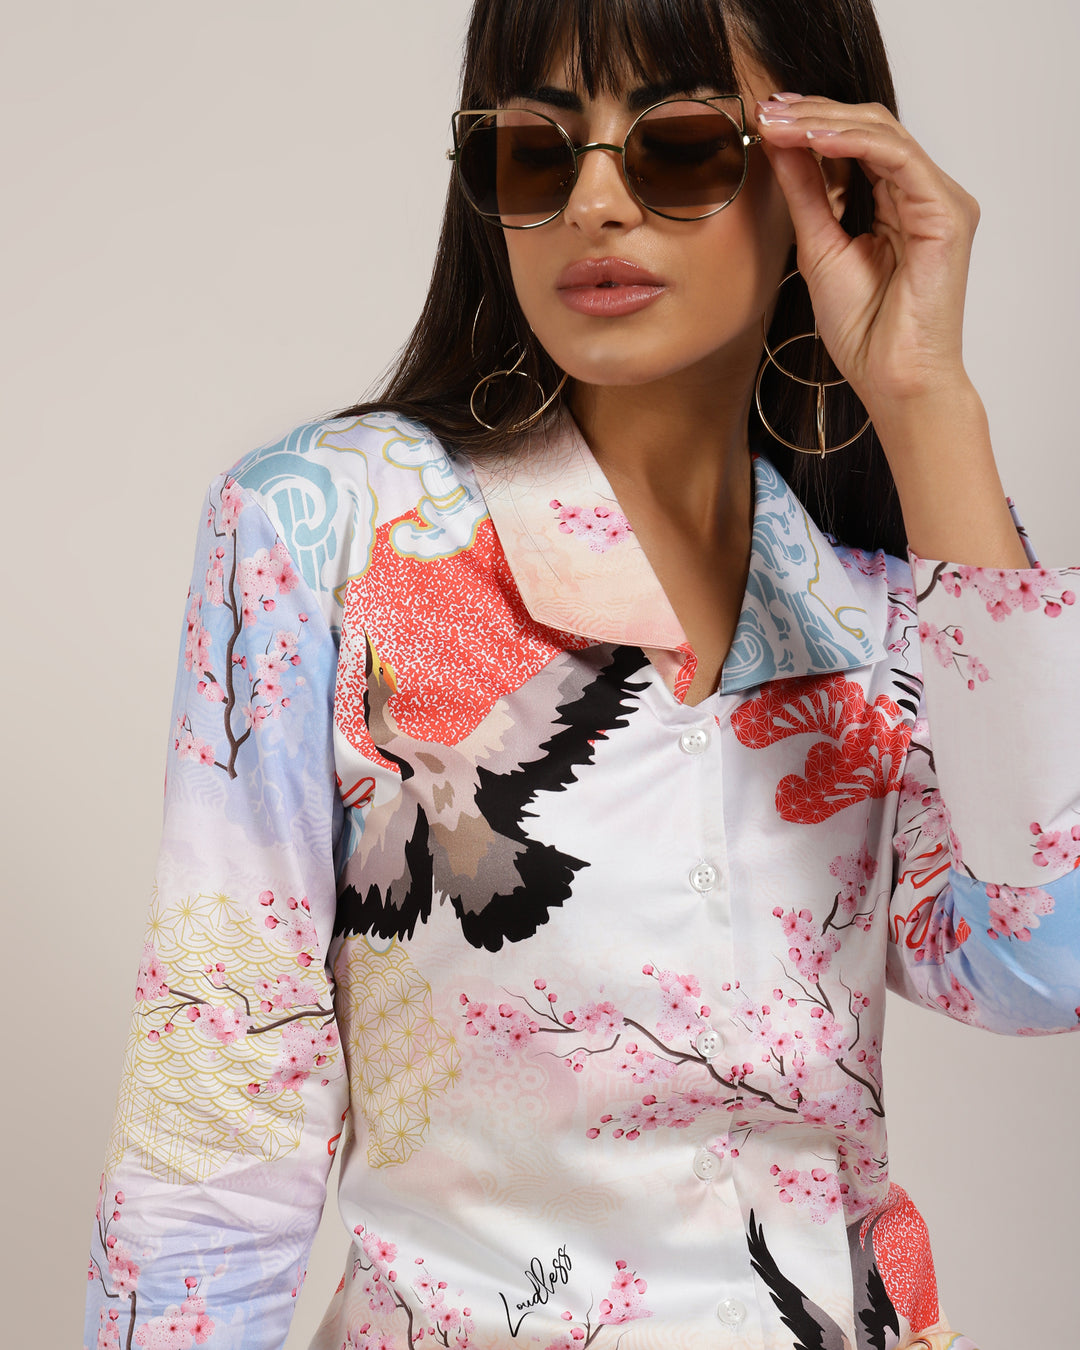 Get a trendy look with this LoudLess Japanese printed women's top